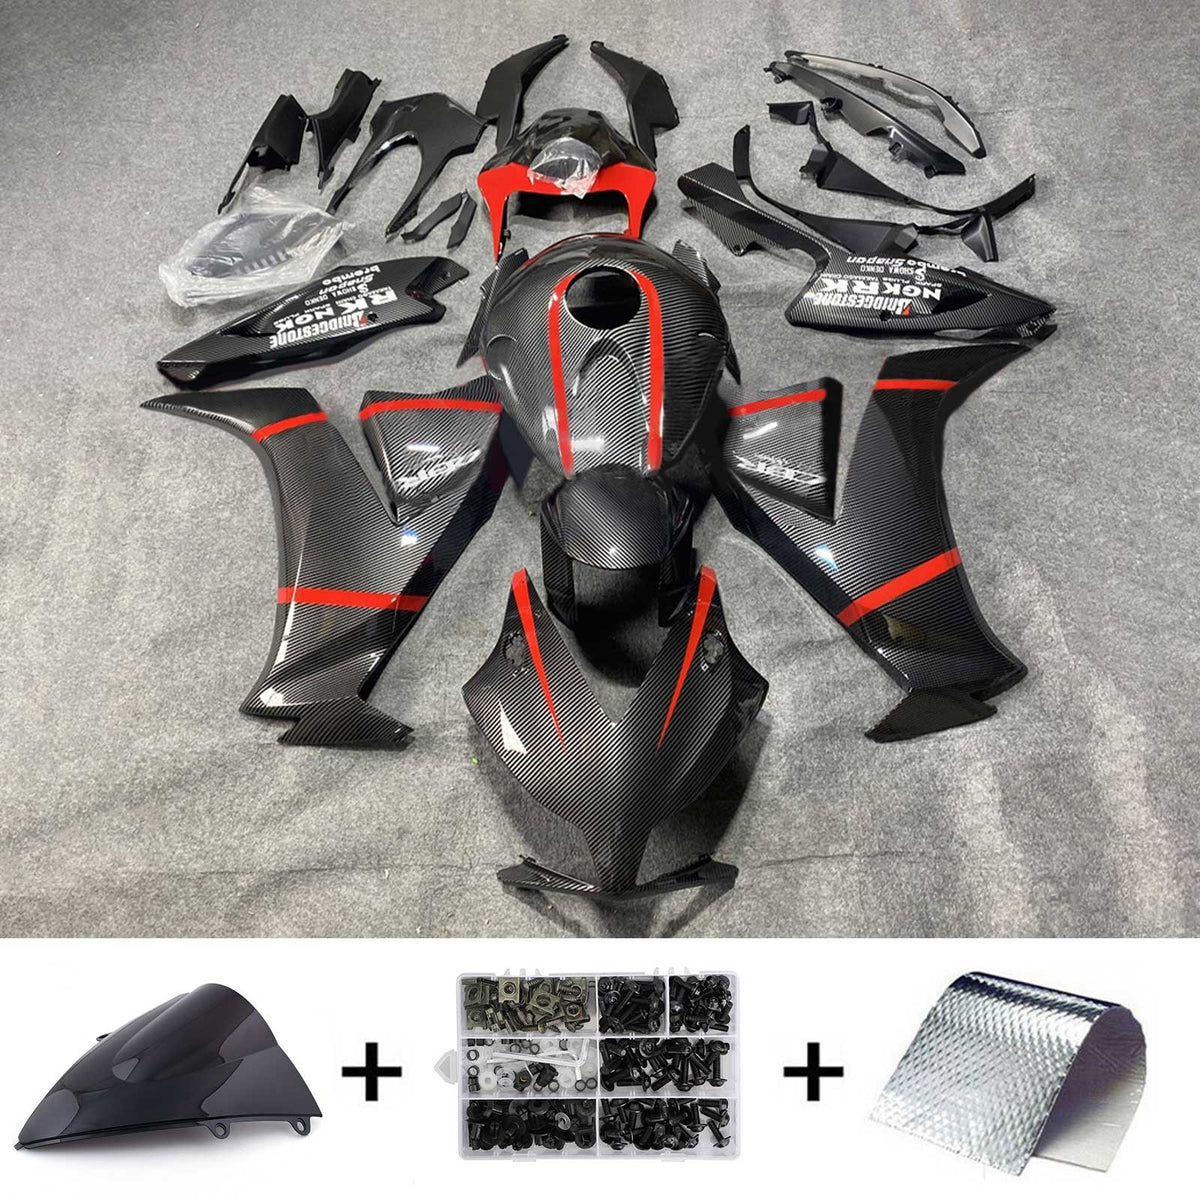 Amotopart 2012-2016 CBR1000RR Honda Carbon Fiber with Red Accent Fairing Kit